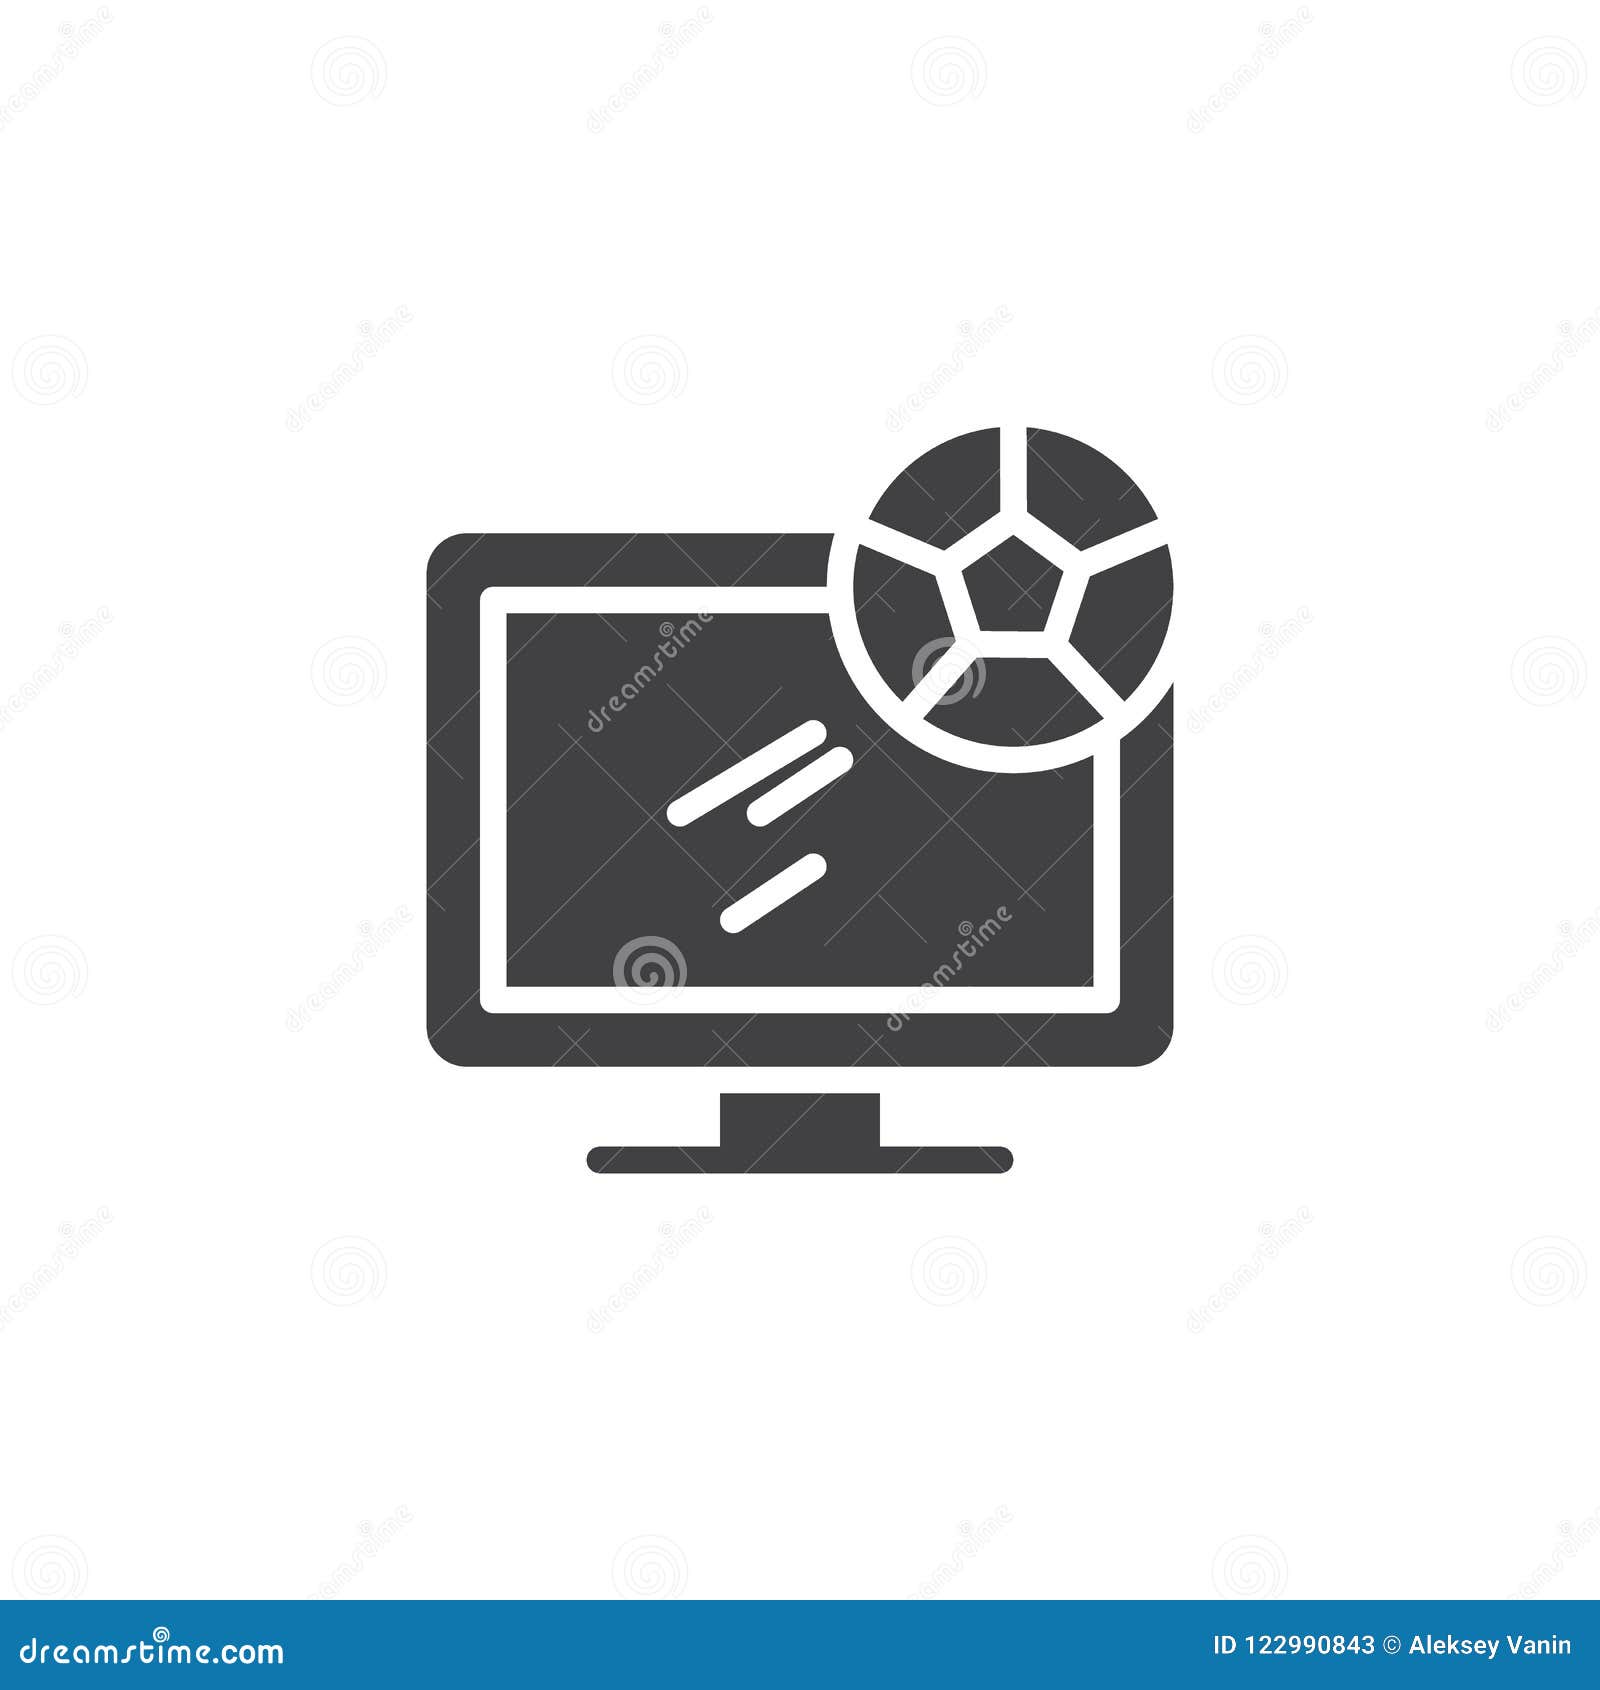 Soccer Live Match on TV Vector Icon